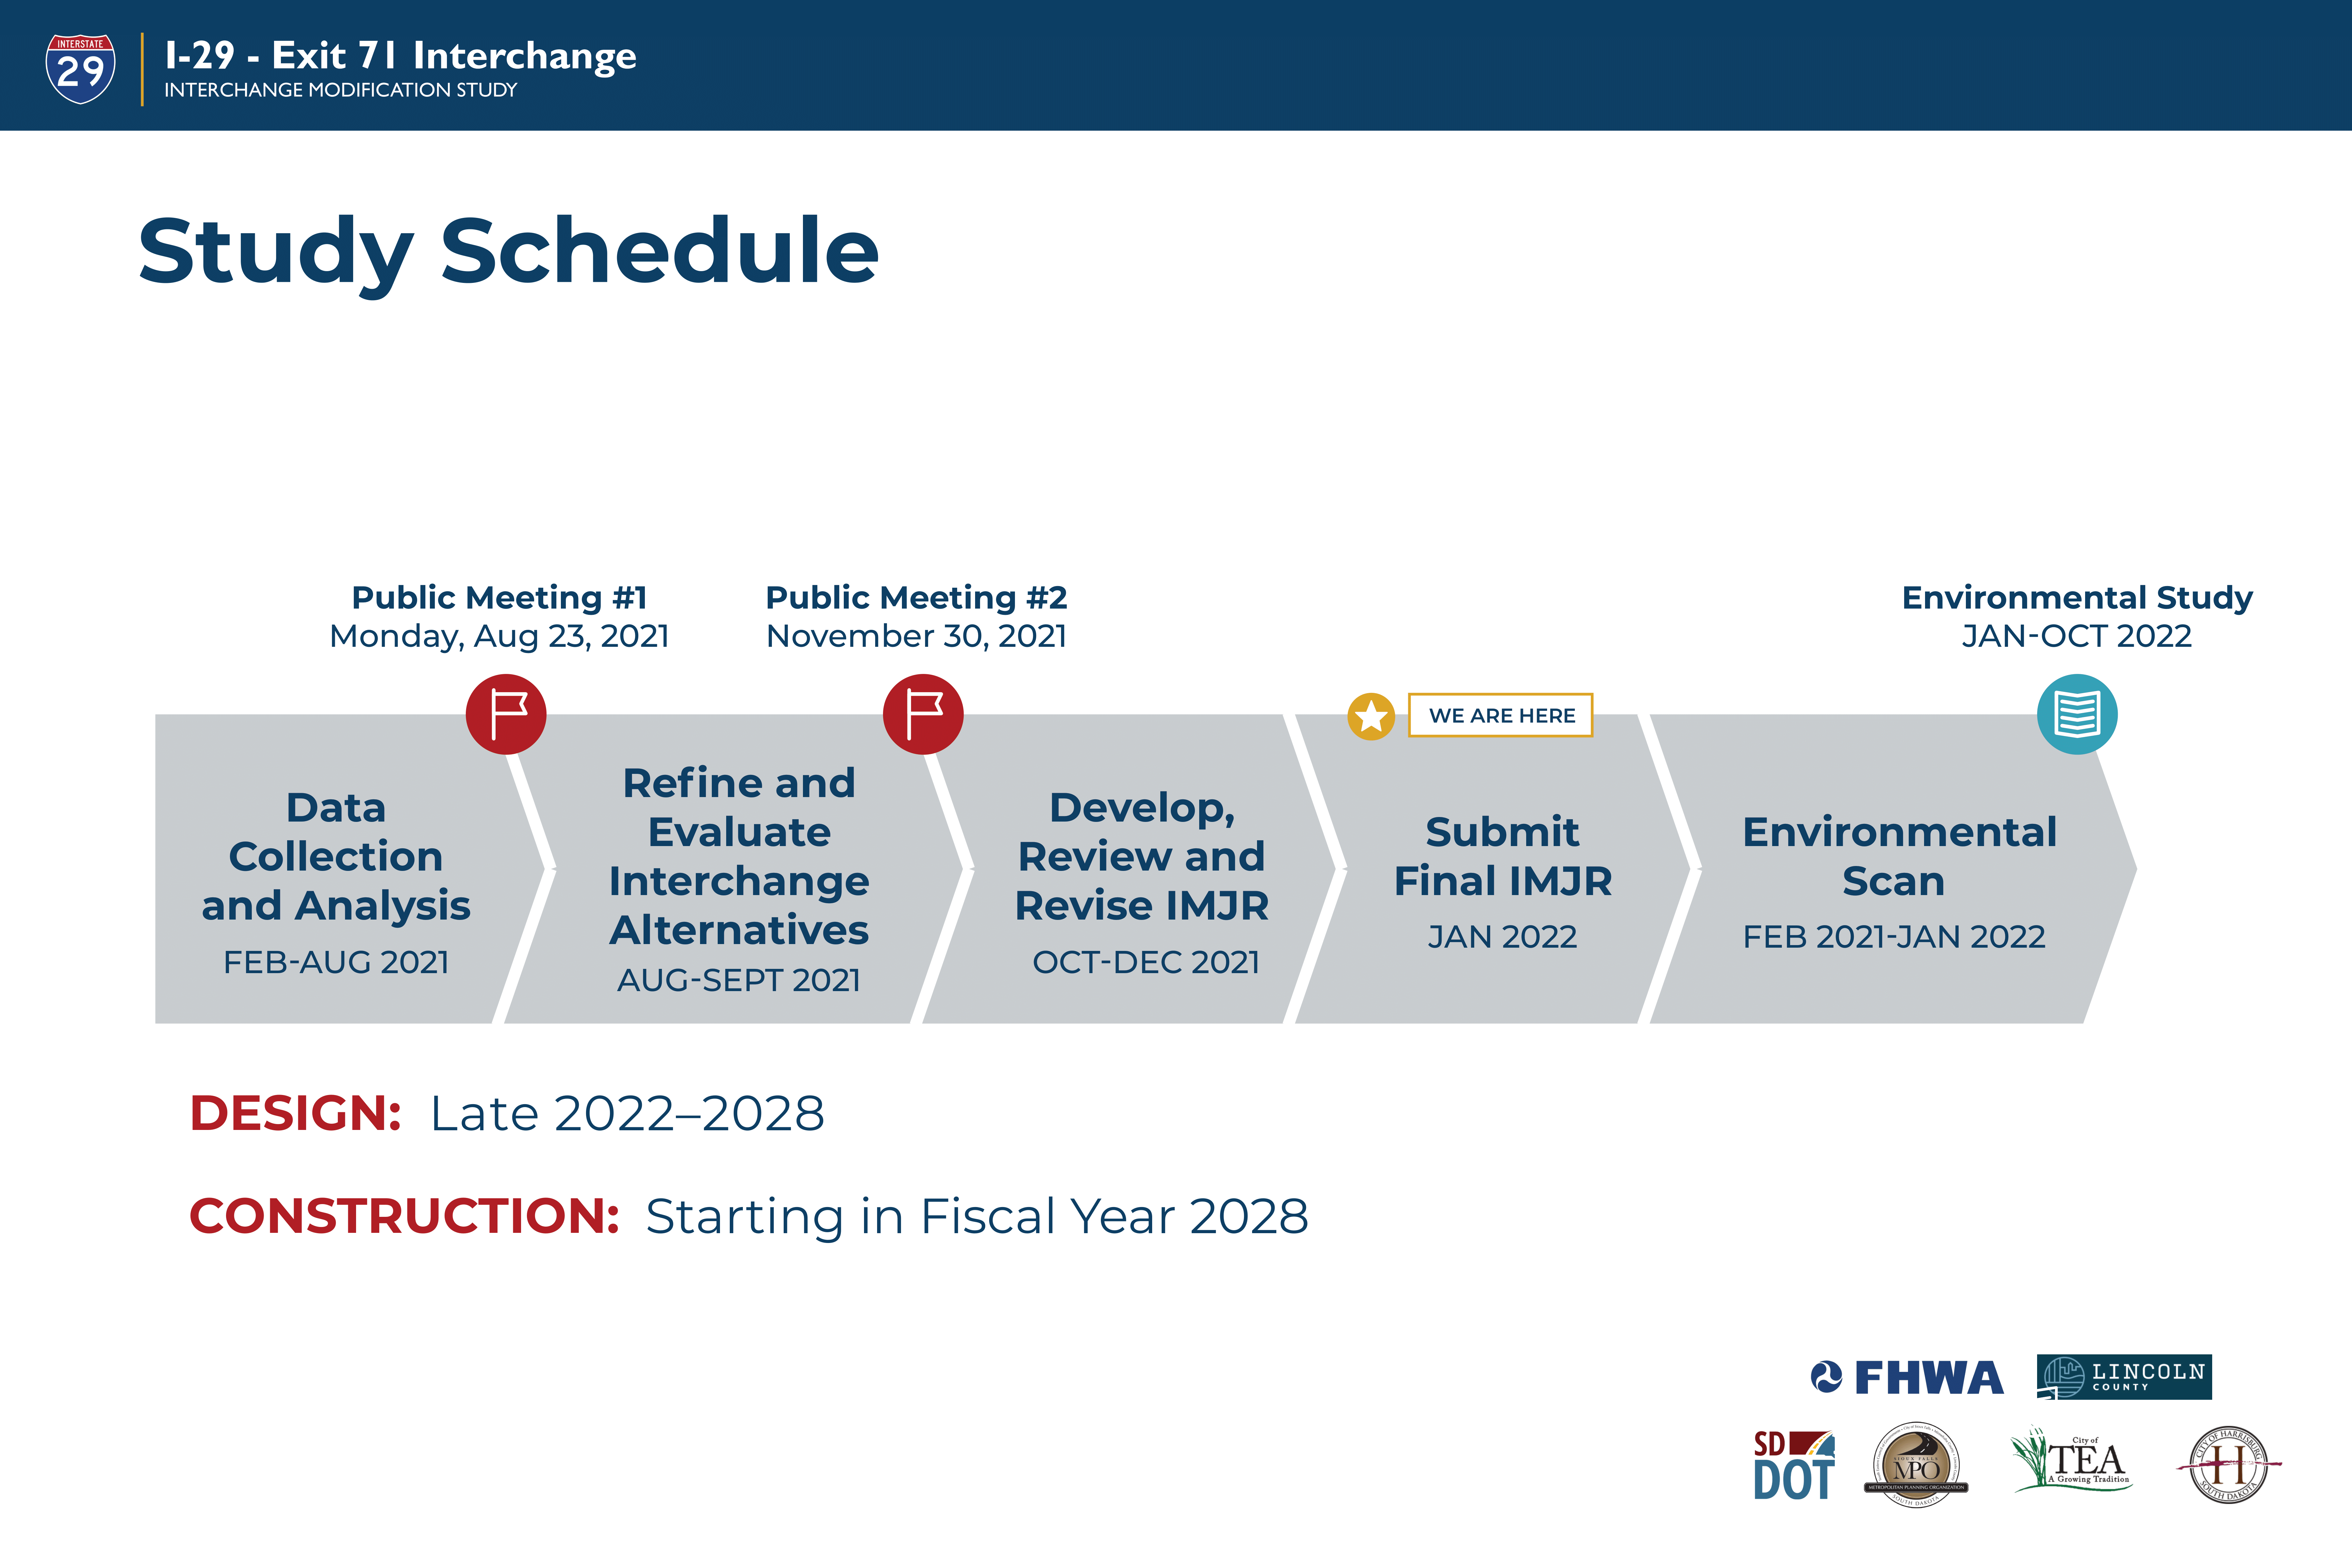 The study schedule shows the anticipated pace of the project. Data collection and analysis will take place from February 2021 to August 2021 with Public Meeting #1 taking place on Monday, August 23, 2021. The interchange alternatives will be refined and evaluated from August 2021 to September 2021 with Public Meeting #2 taking place shortly after this process is completed. The IMJR will be developed, reviewed, and revised in October through December of 2021. The final IMJR will be submitted in January 2022. An environmental scan will be conducted from February 2021 to January 2022 with an environmental report being prepared from January 2022 to October 2022. 